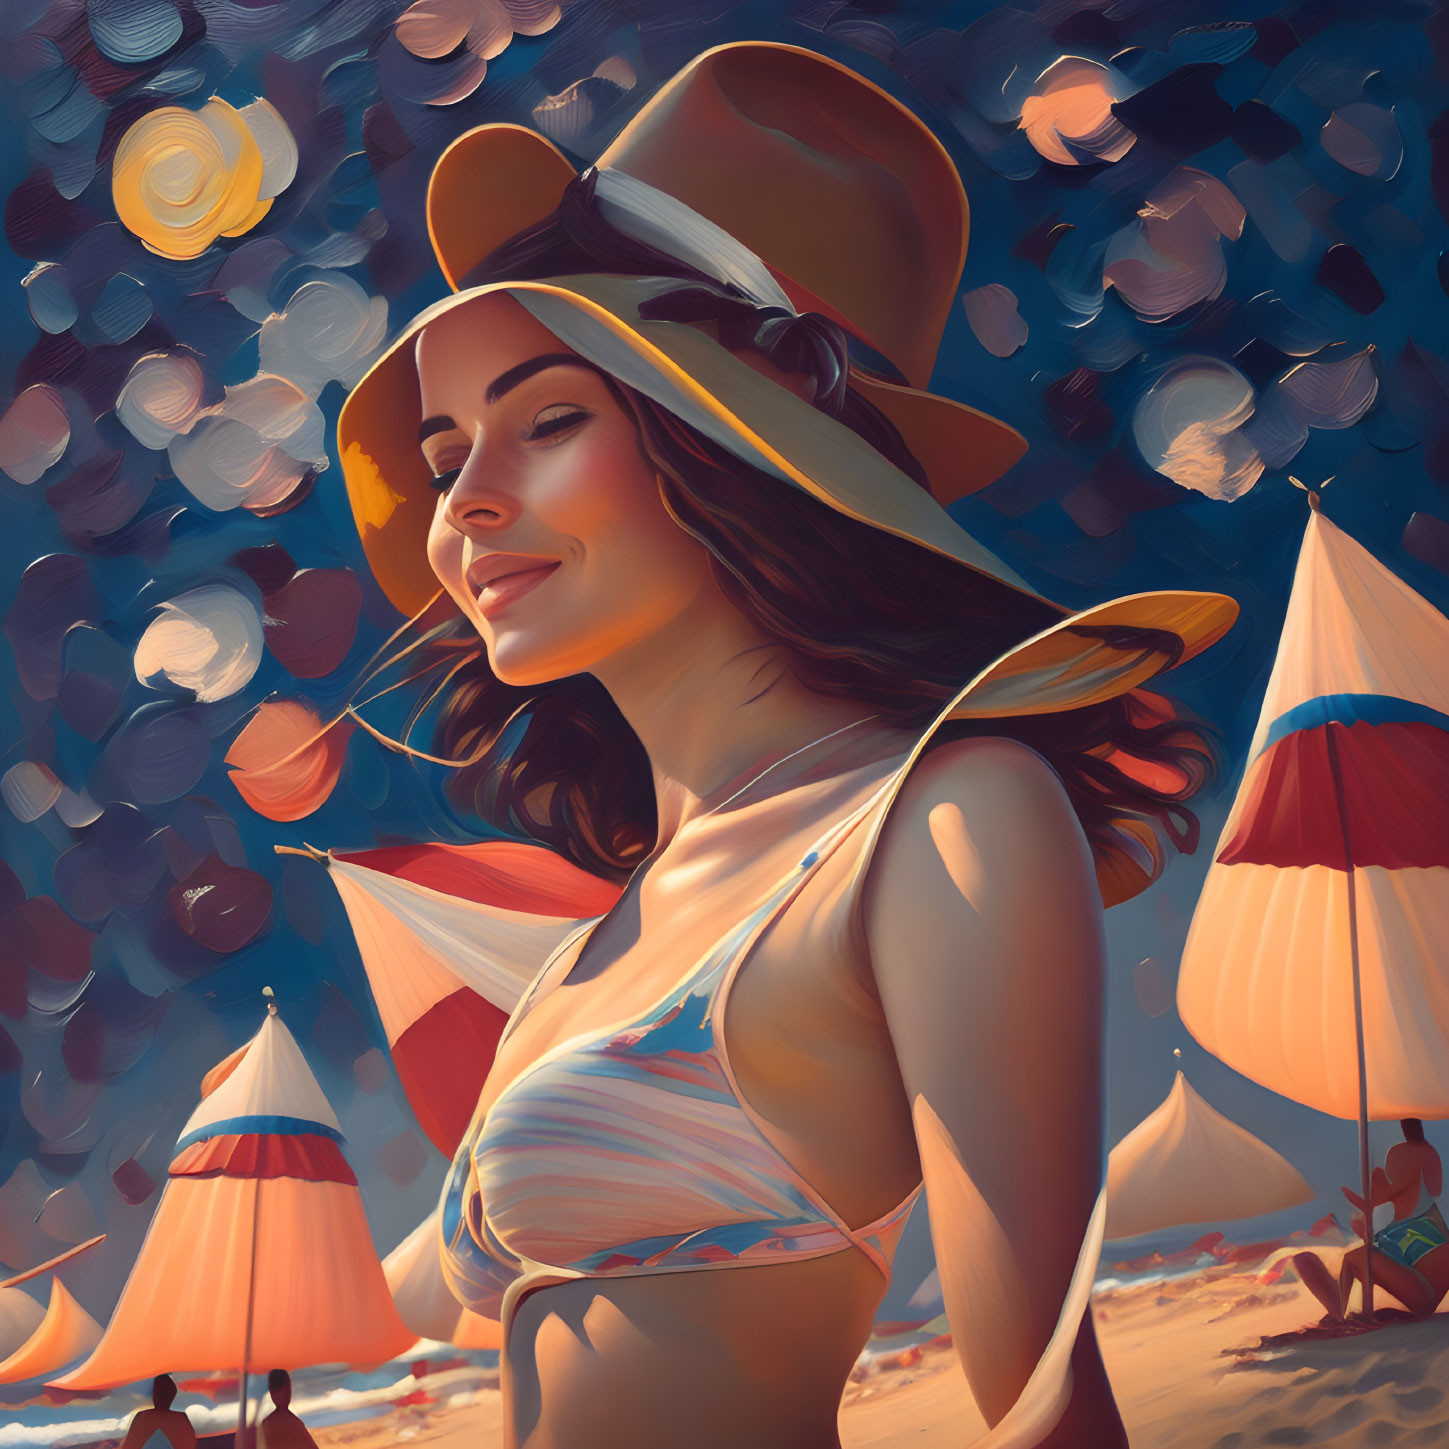 Woman in sunhat and bikini on beach with colorful umbrellas and lights.